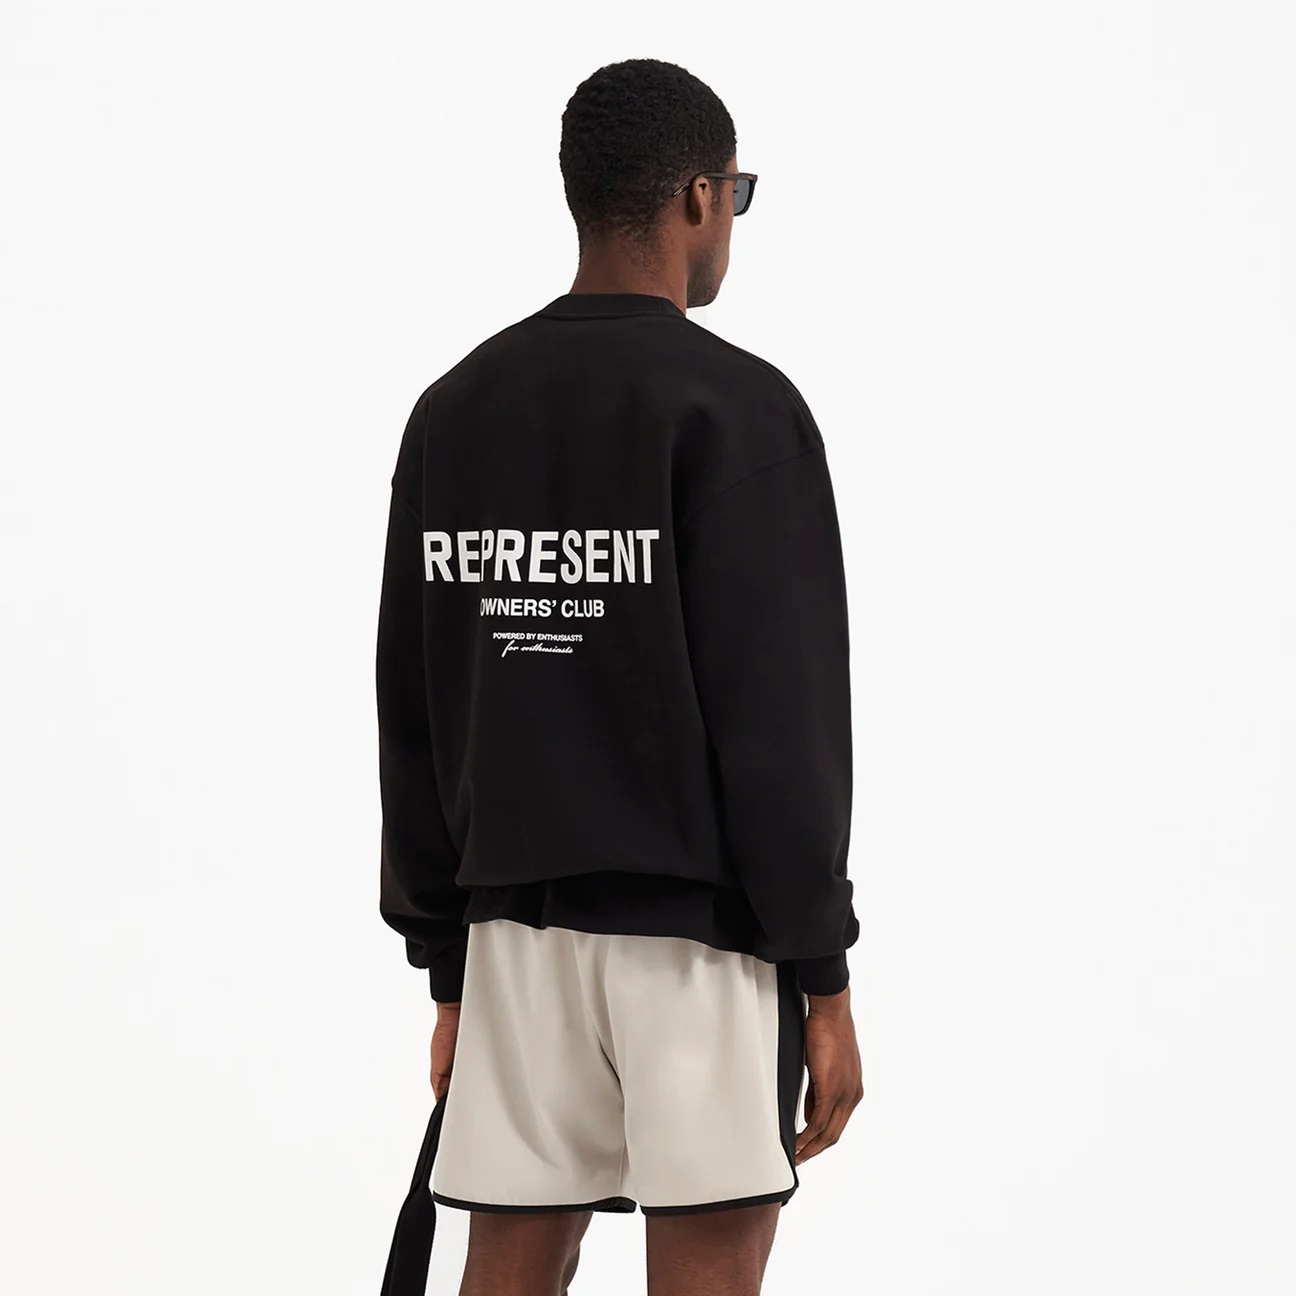 REPRESENT Owners Club Sweater in Black M